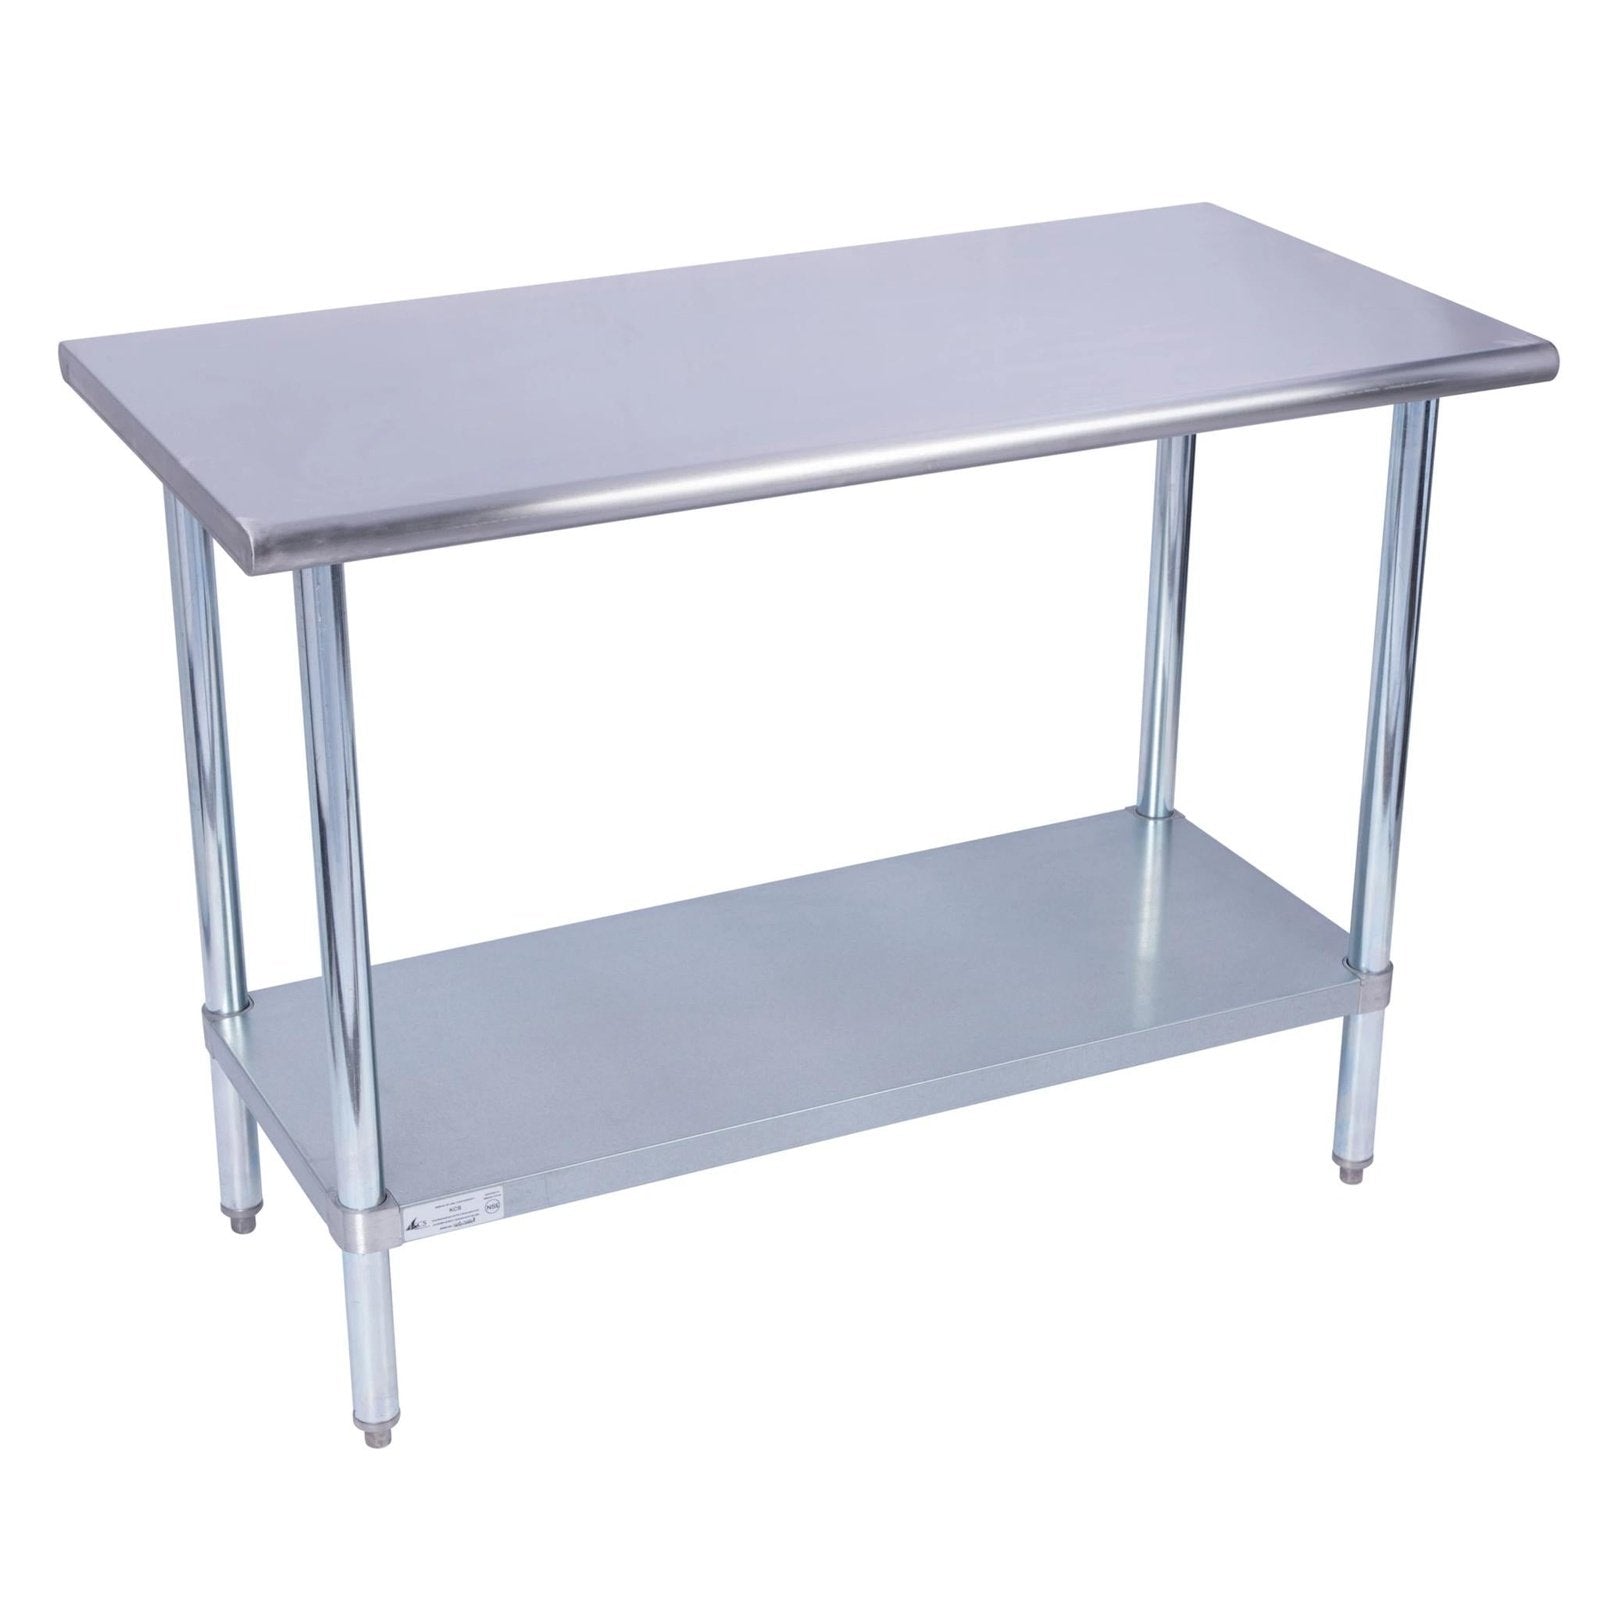 KCS 24" x 48" Stainless Steel Work Table with Galvanized Under Shelf